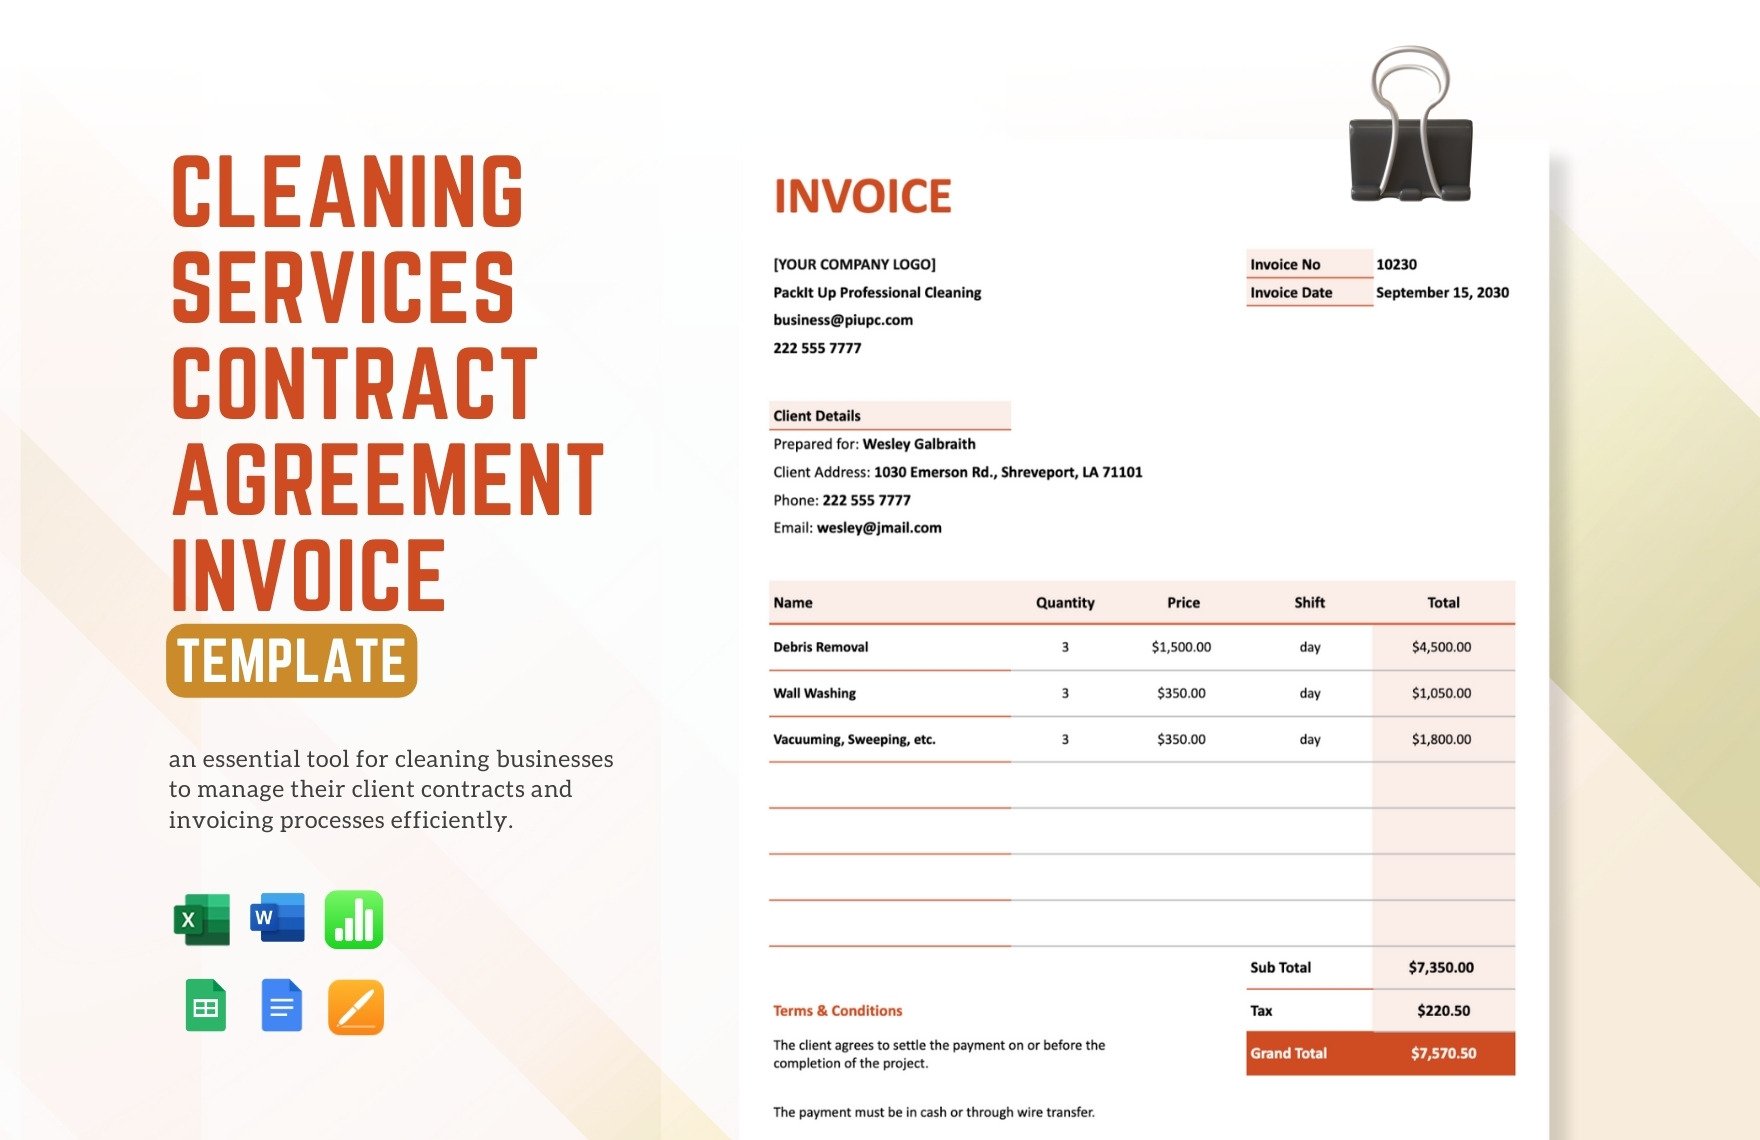 Free Cleaning Services Contract Agreement Invoice Template